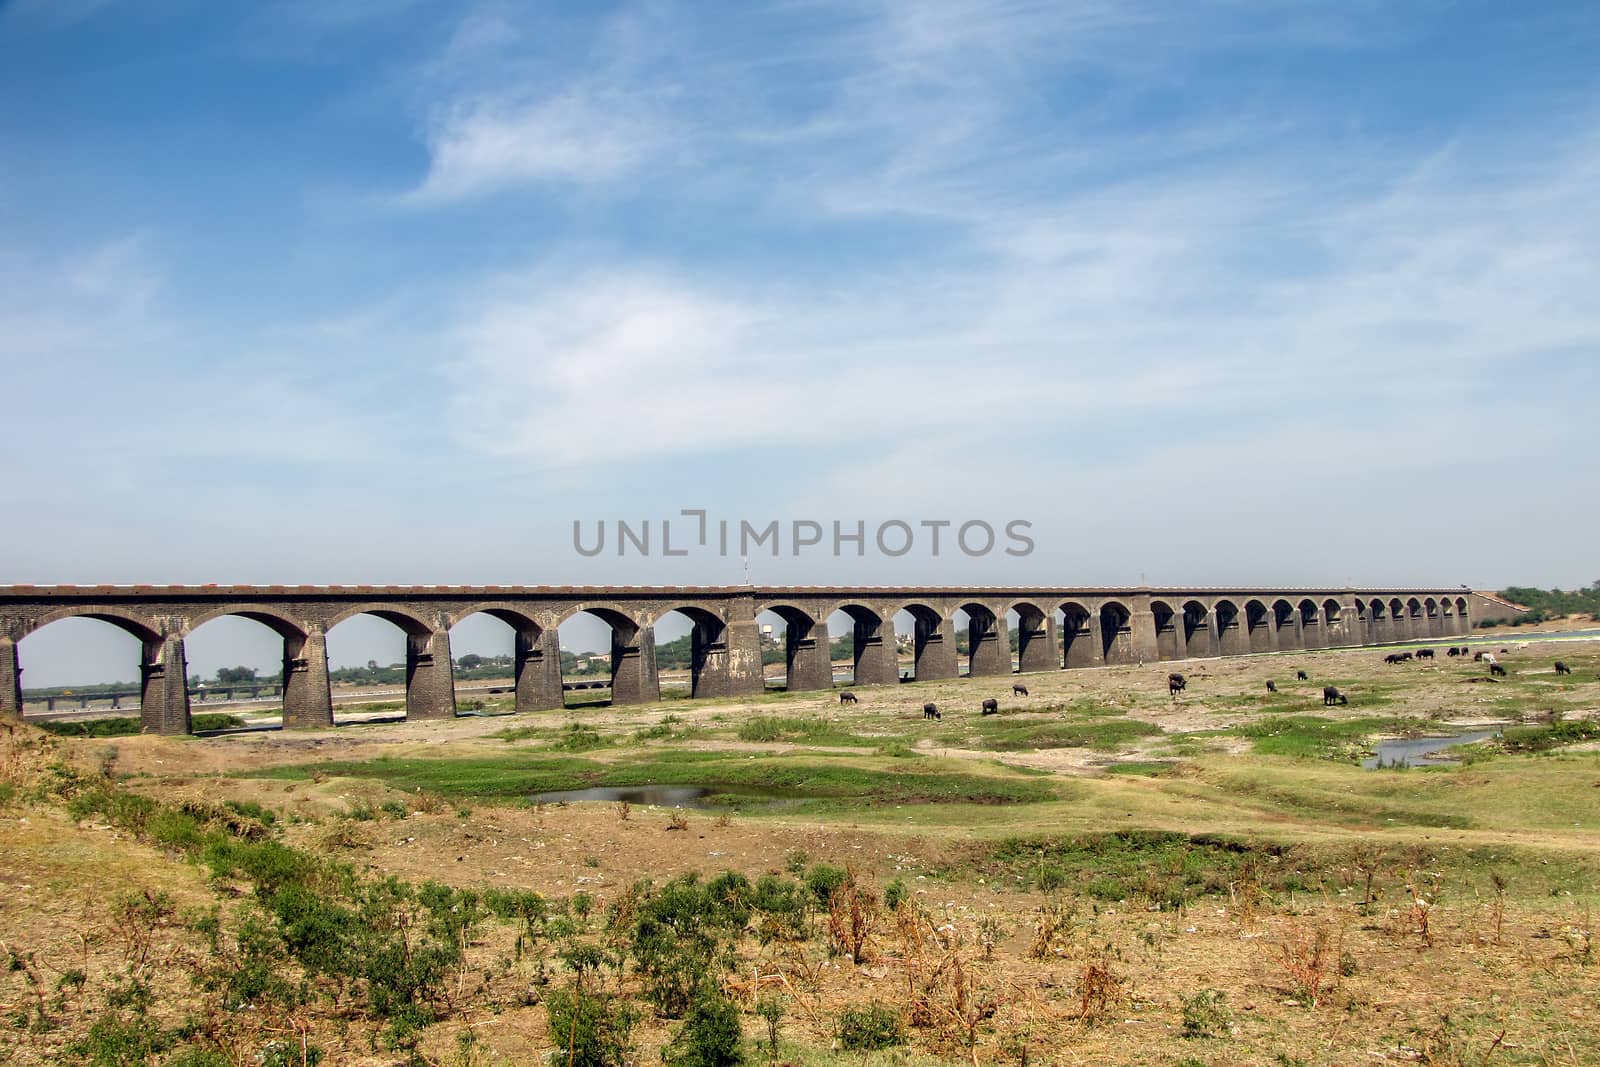 Almost dry river bed of Bheema river and an old, long stone arched railway bridge i Daund, Maharashtra, India.